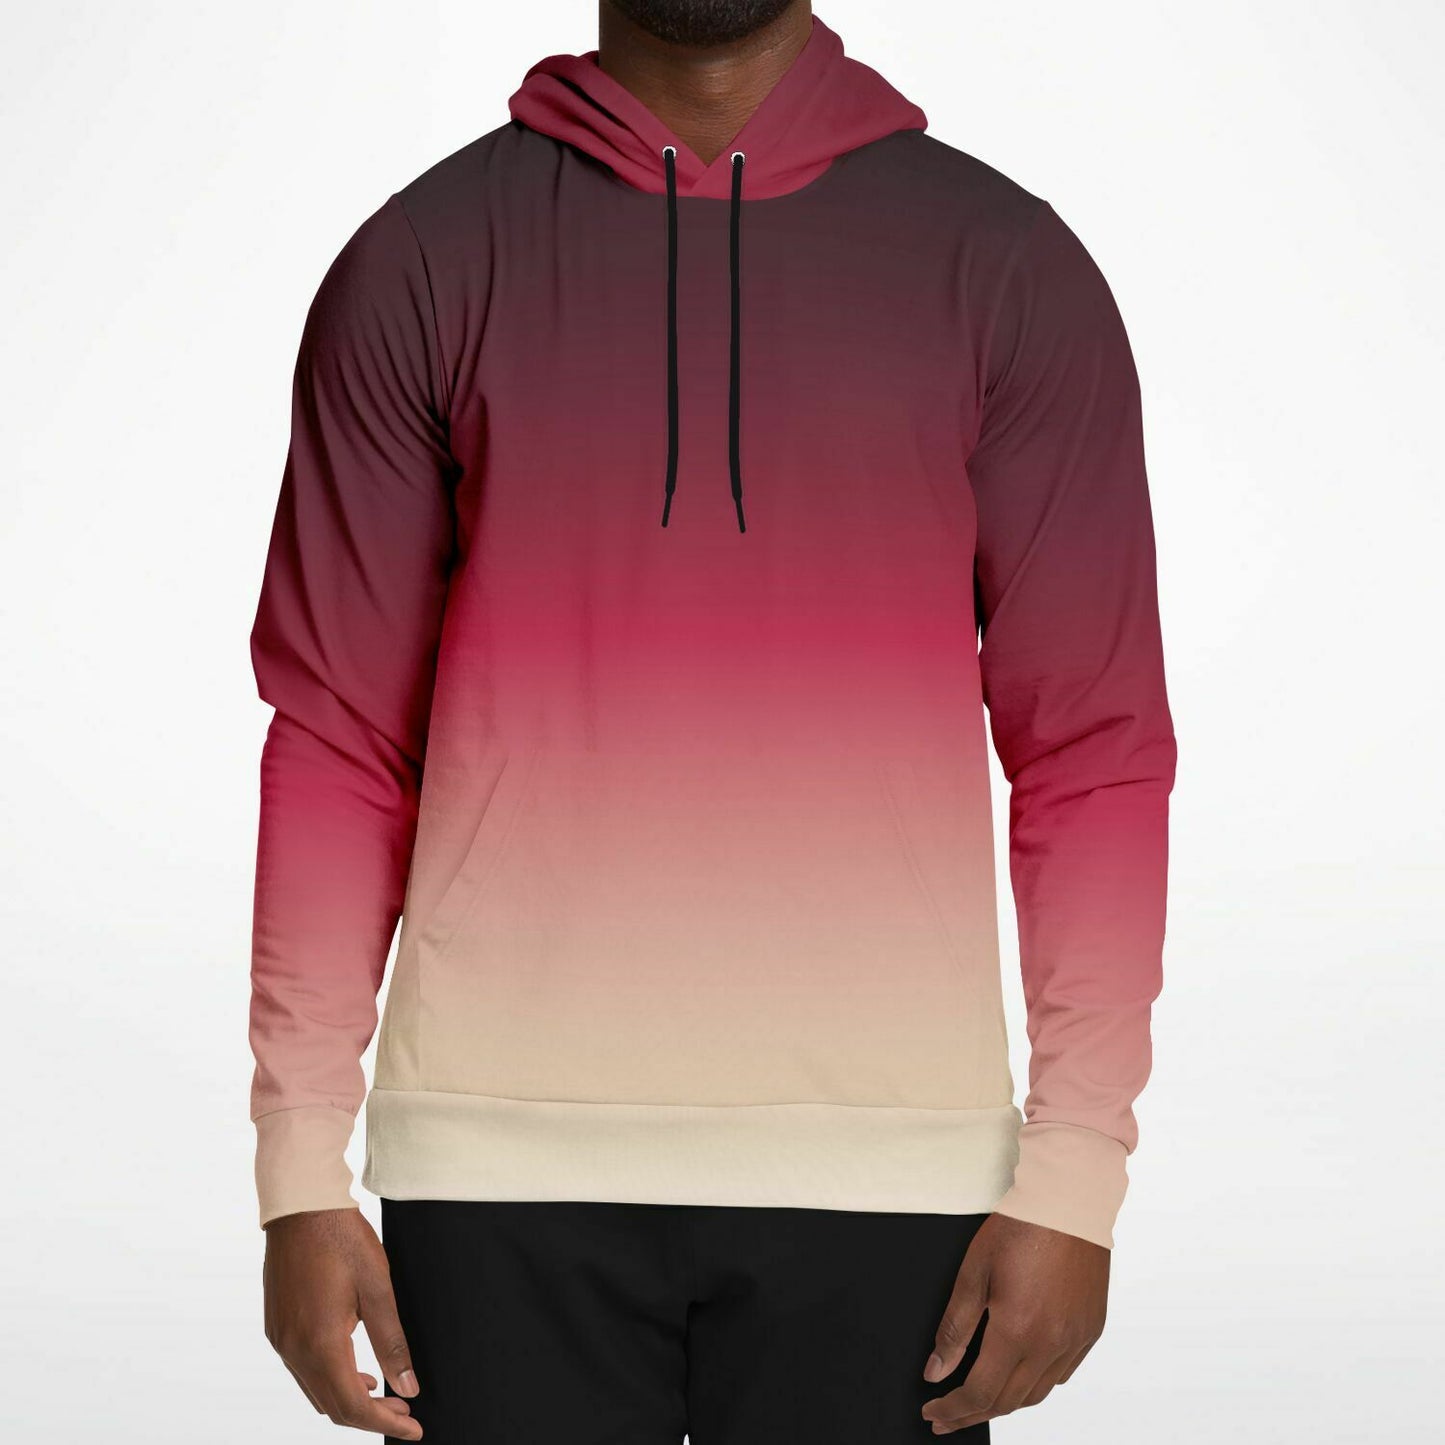 Load image into Gallery viewer, Boysenberry Fade Unisex Hoodie
